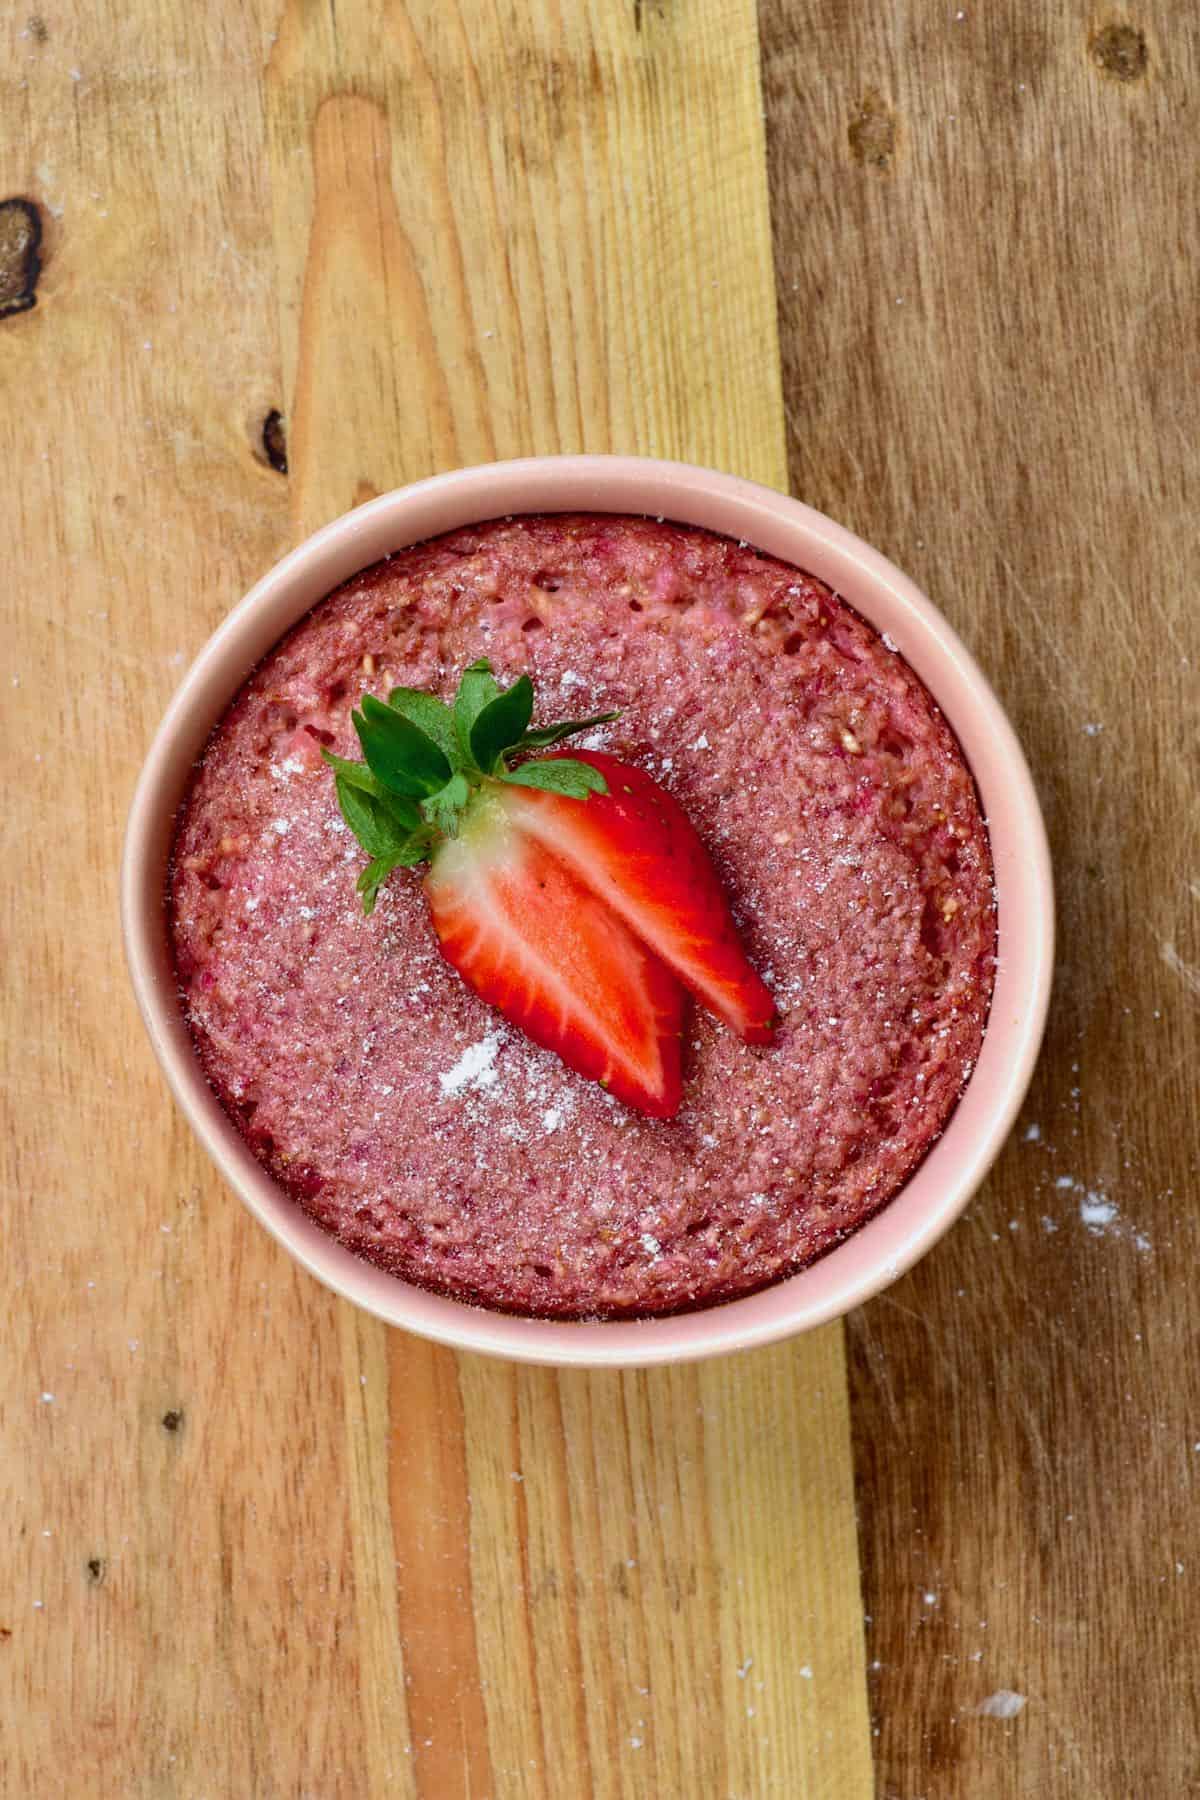 Strawberry baked oats with strawberry on top